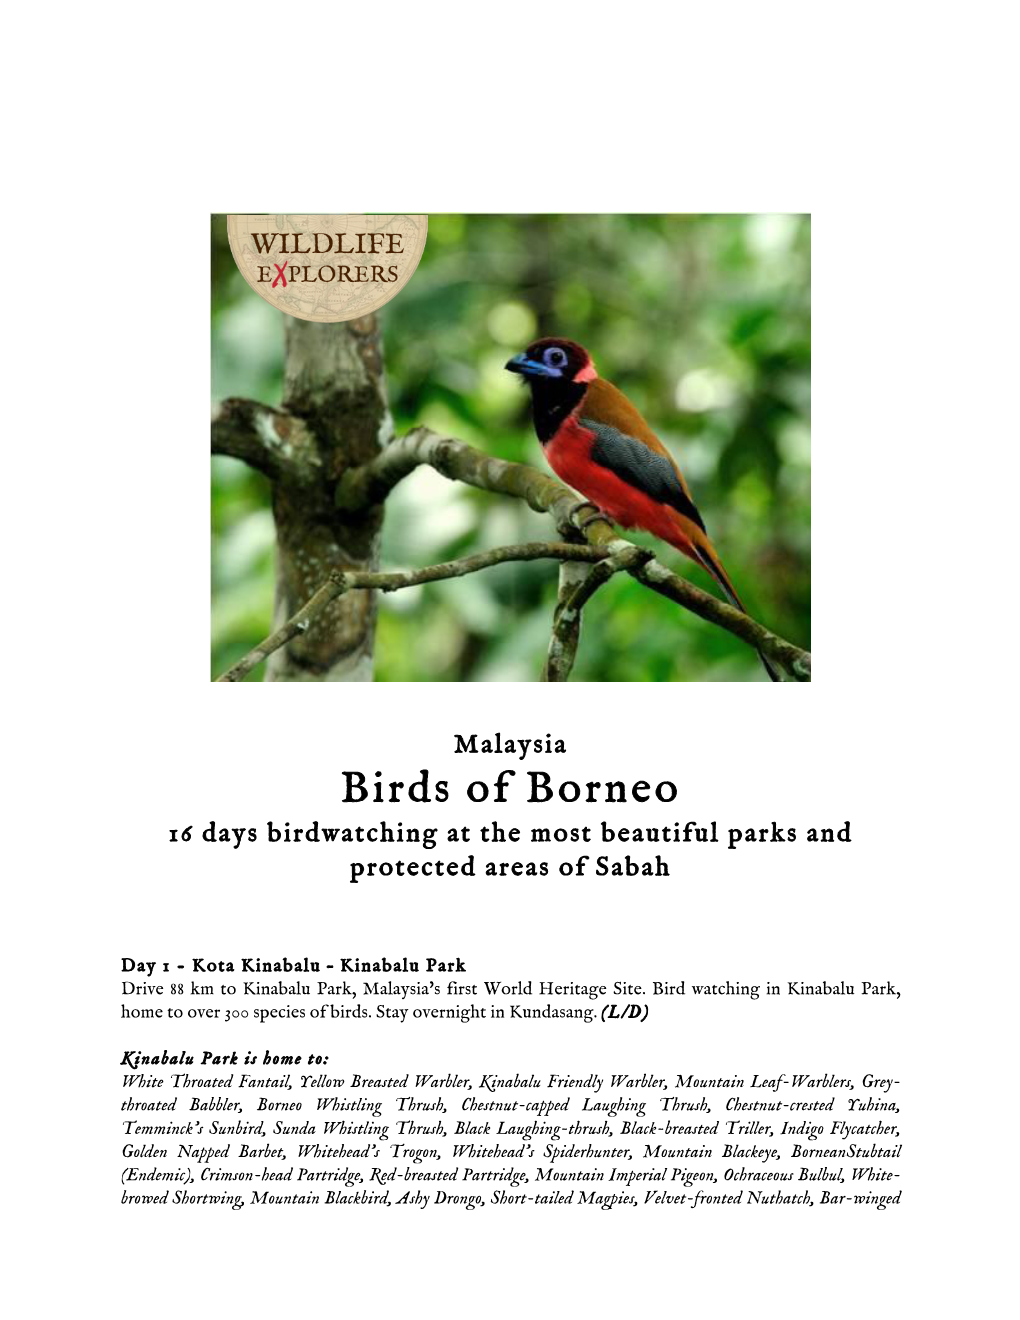 Birds of Borneo 16 Days Birdwatching at the Most Beautiful Parks and Protected Areas of Sabah